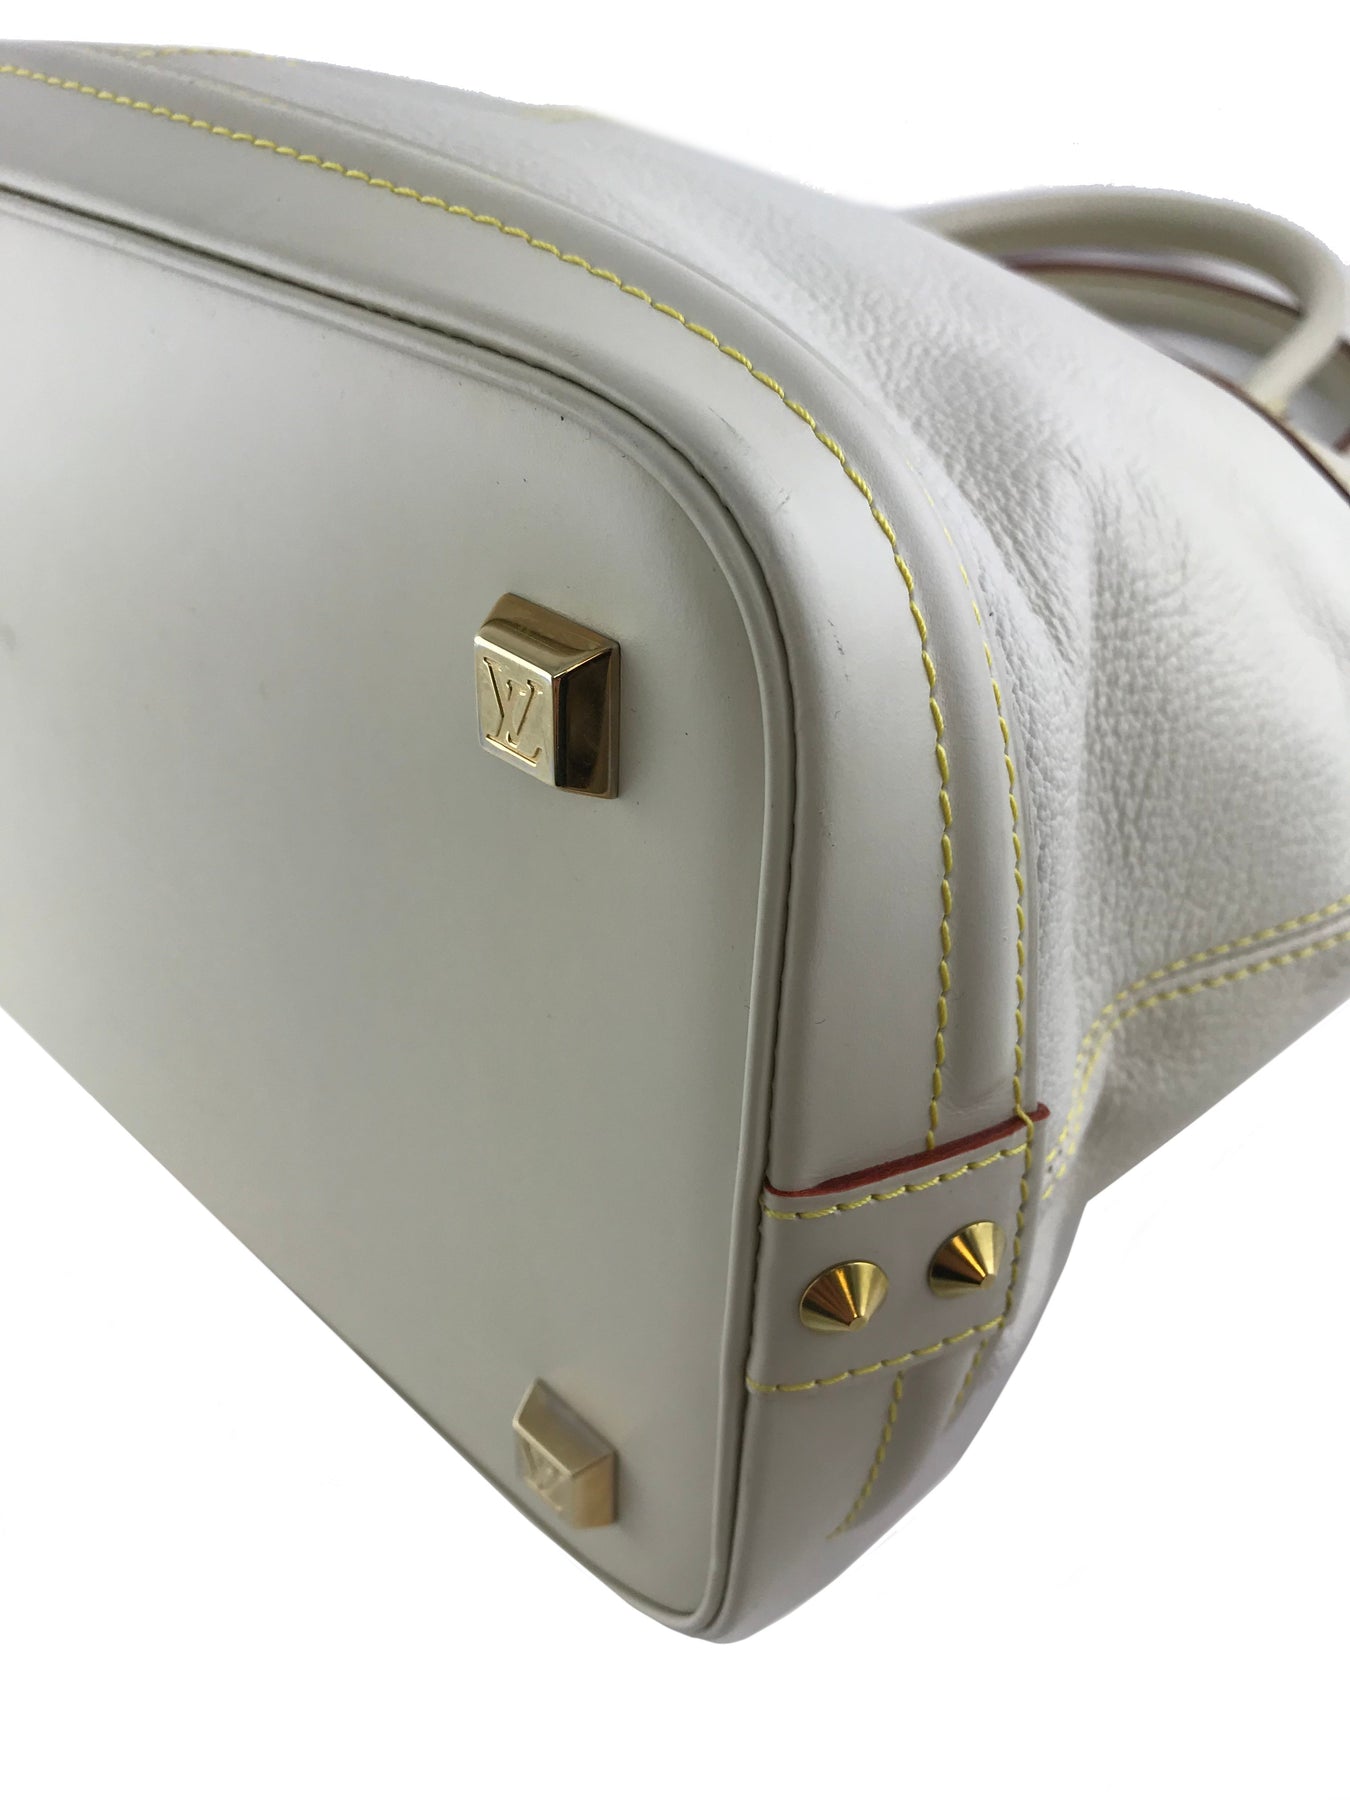 Louis Vuitton Ivory Suhali Leather Lockit PM Dome Bag 820lv88